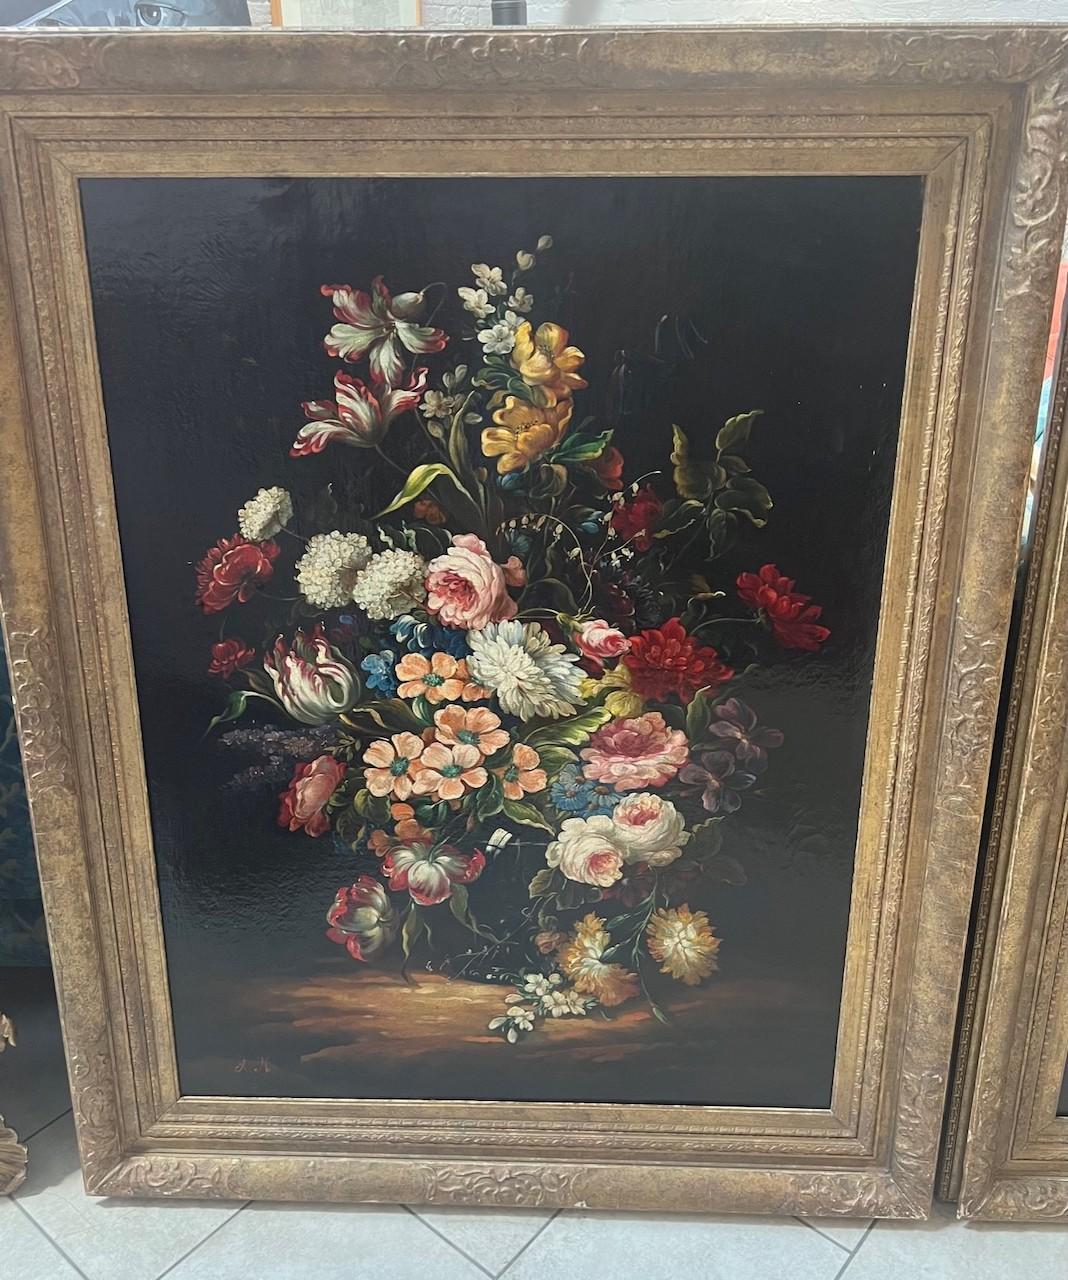 Artist - Unknown but monogrammed AM

Title - Pair of Still life of Flowers

Oil on Canvas dating from the late 18th/early 19th century 

The dimensions are 130cm x 105cm 

A beautiful and large pair of oil on canvas still life. The flowers are Dutch